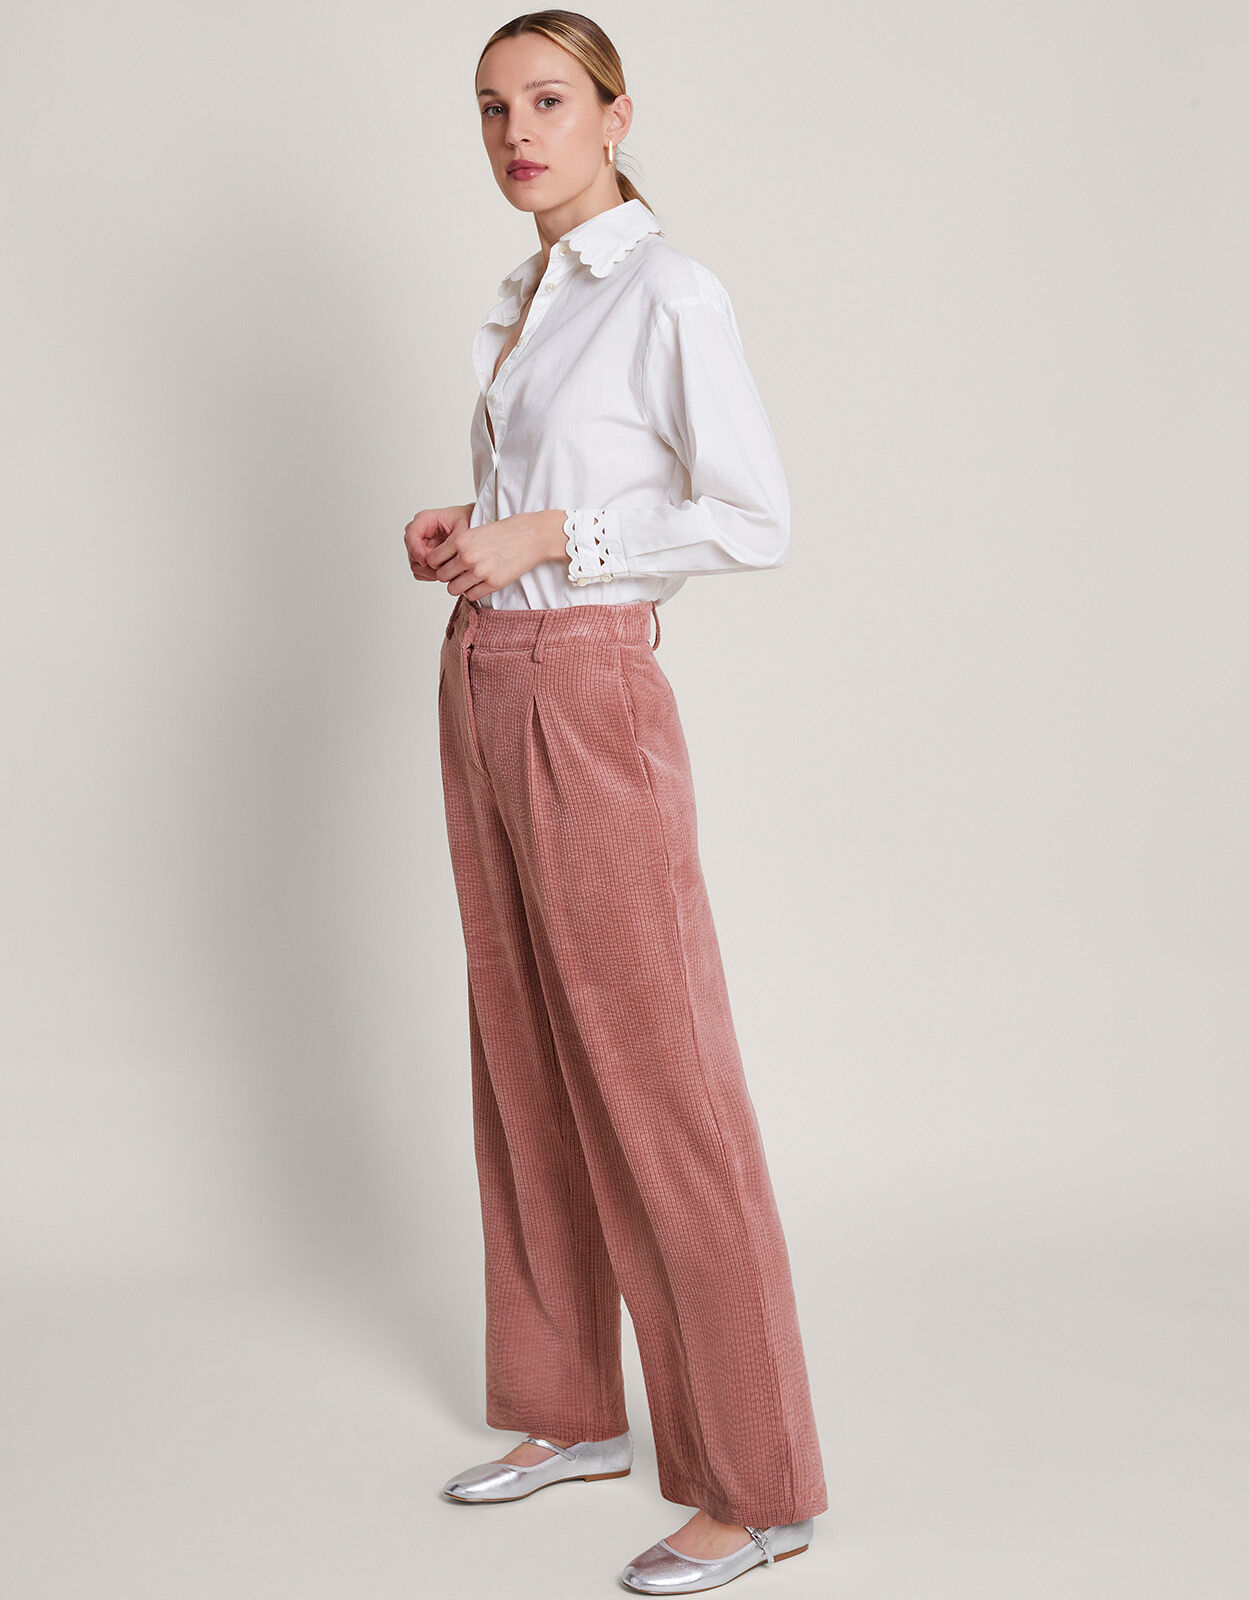 RIVER ISLAND FAUX Leather Tapered Trousers Size UK 16R Soft Inside £24.99 -  PicClick UK